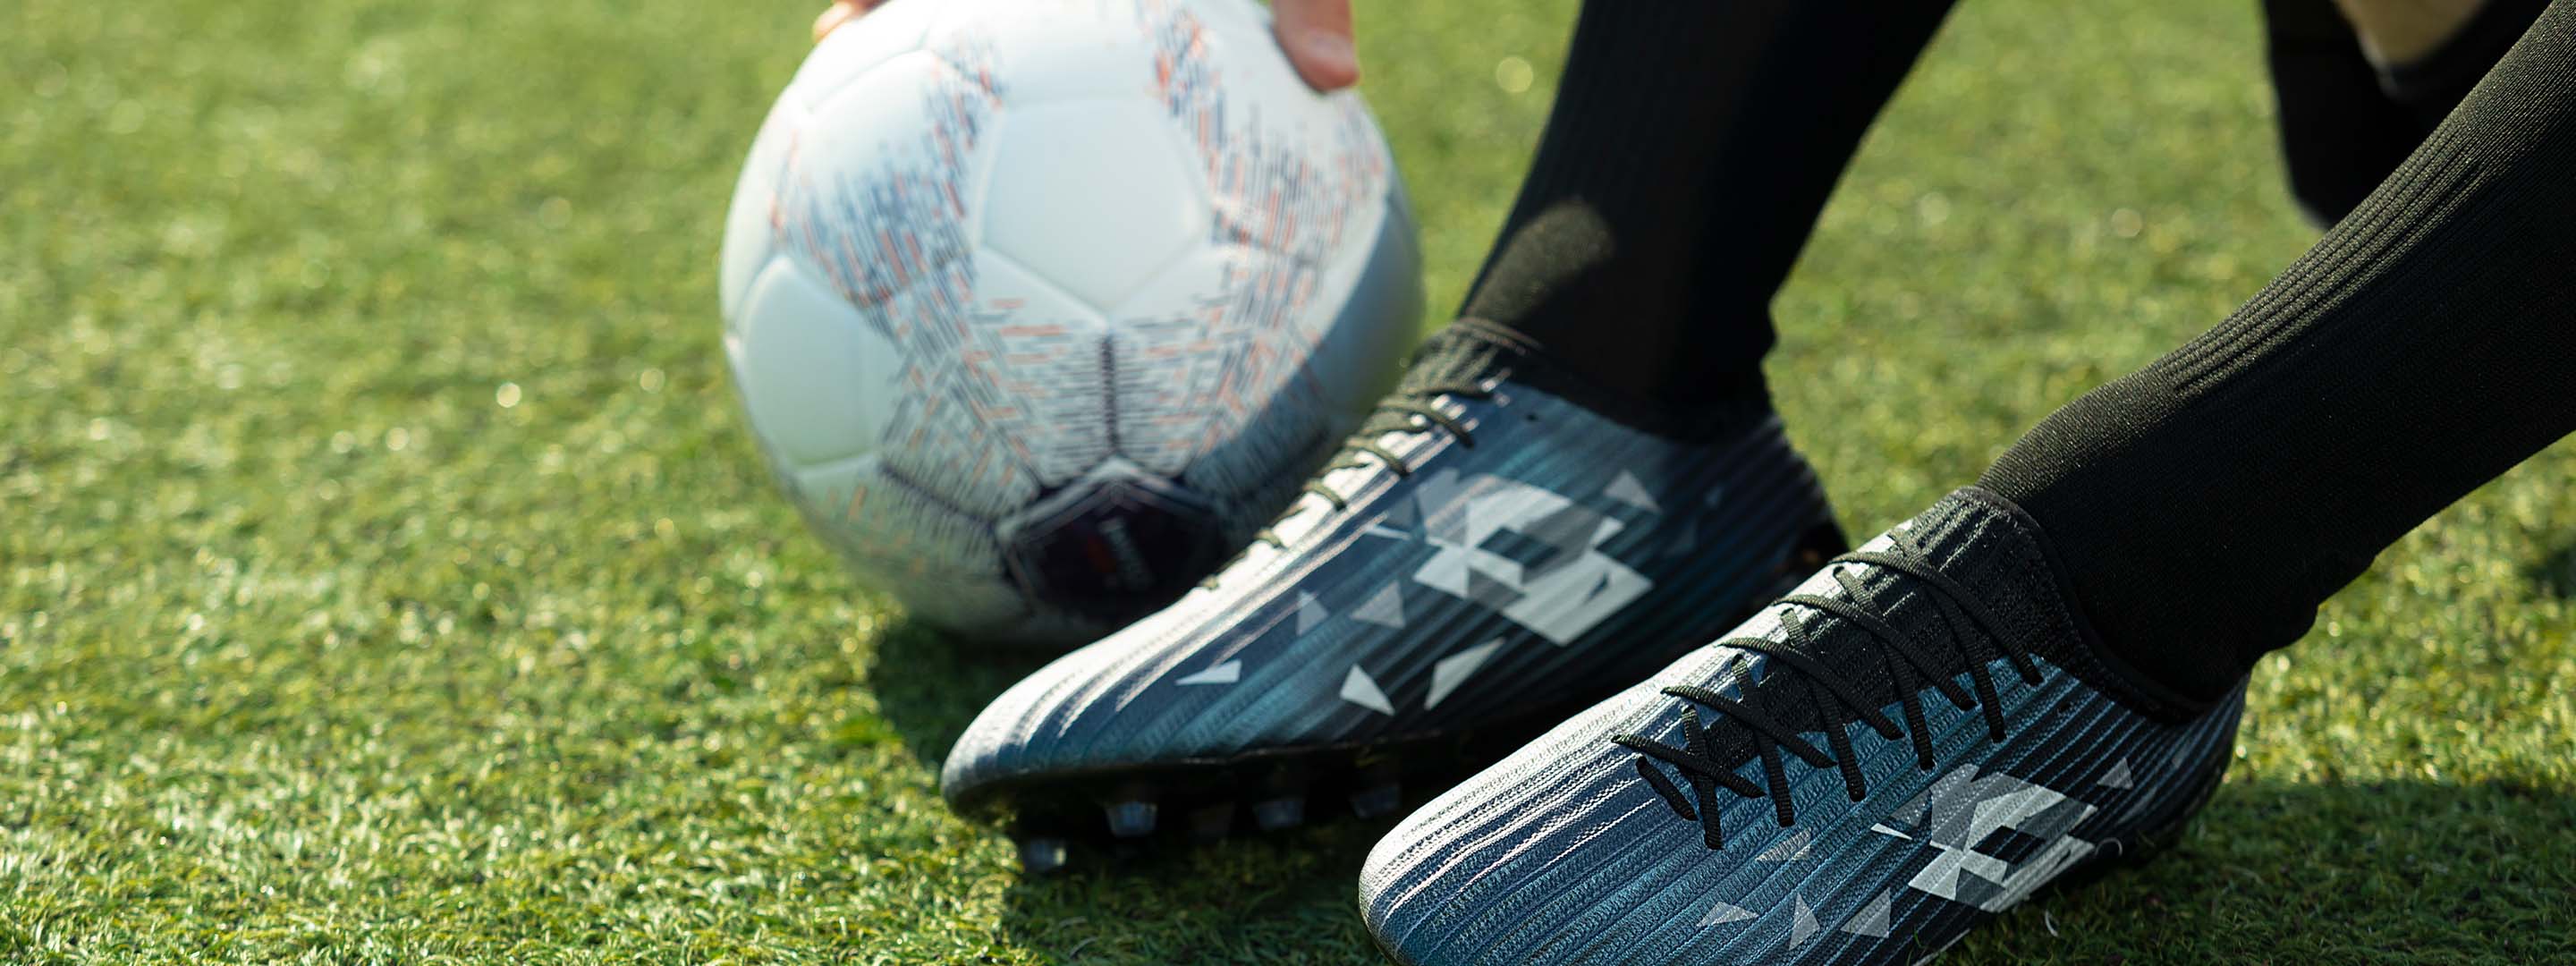 The Basics of Soccer Attire - Cleats, Shorts, & More